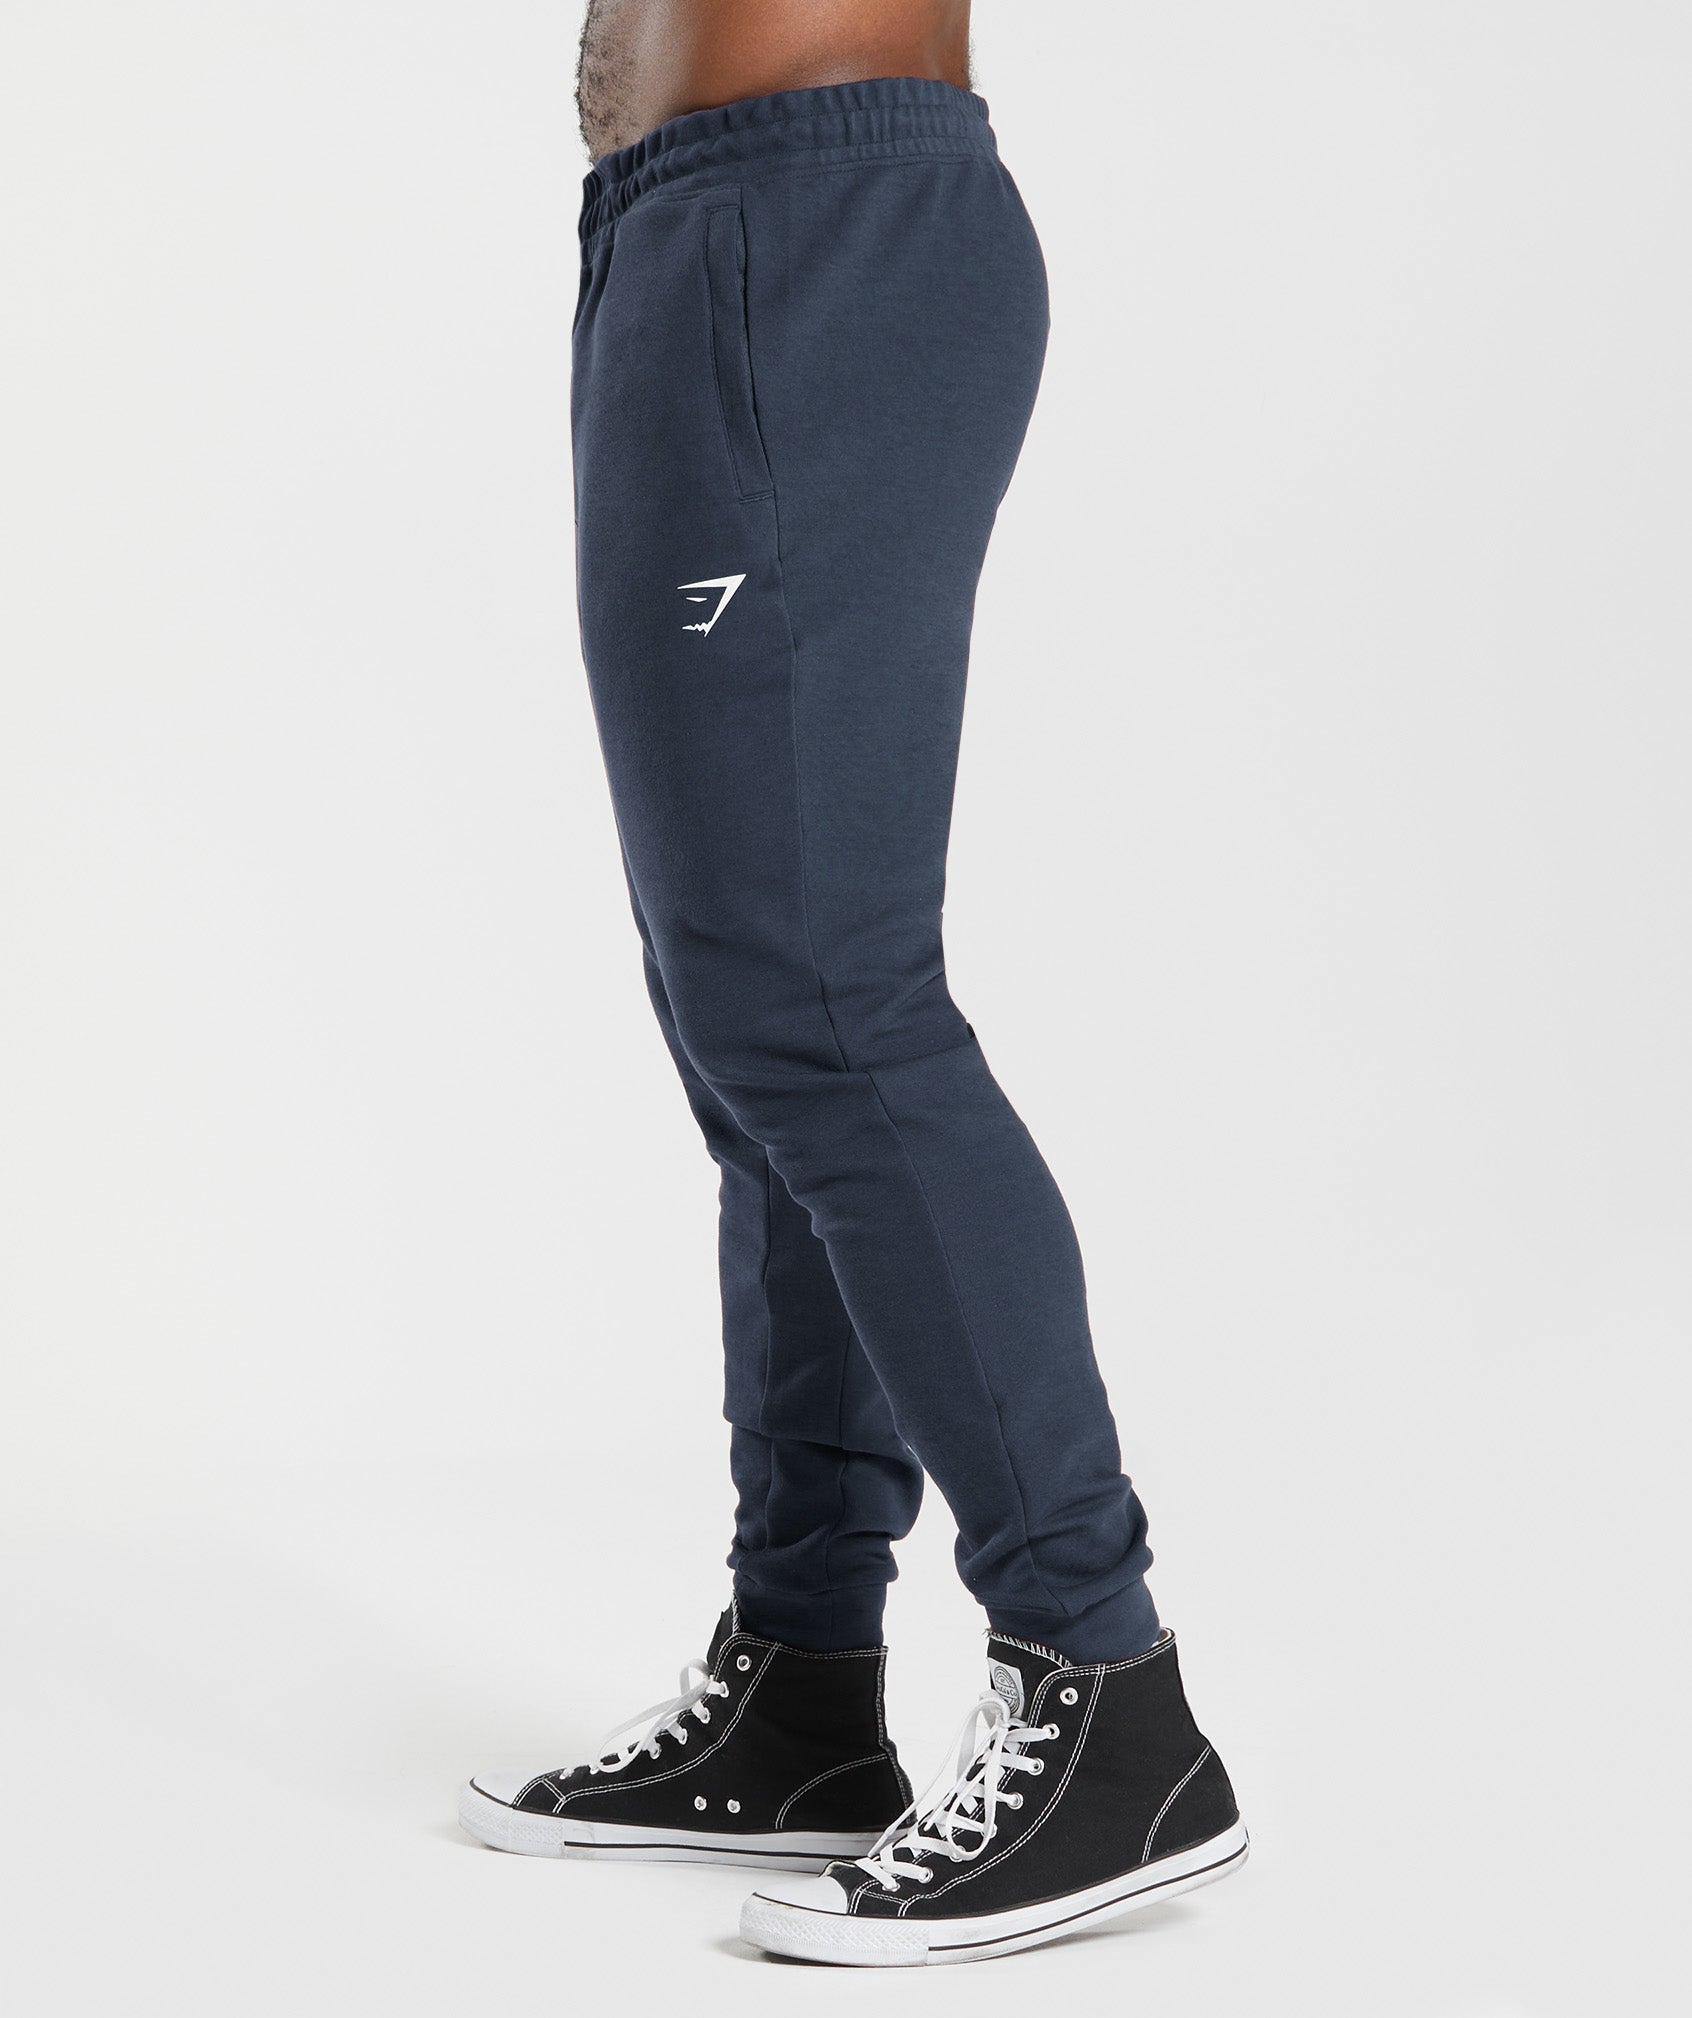 Gymshark Solid Blue Active Pants Size XS - 54% off